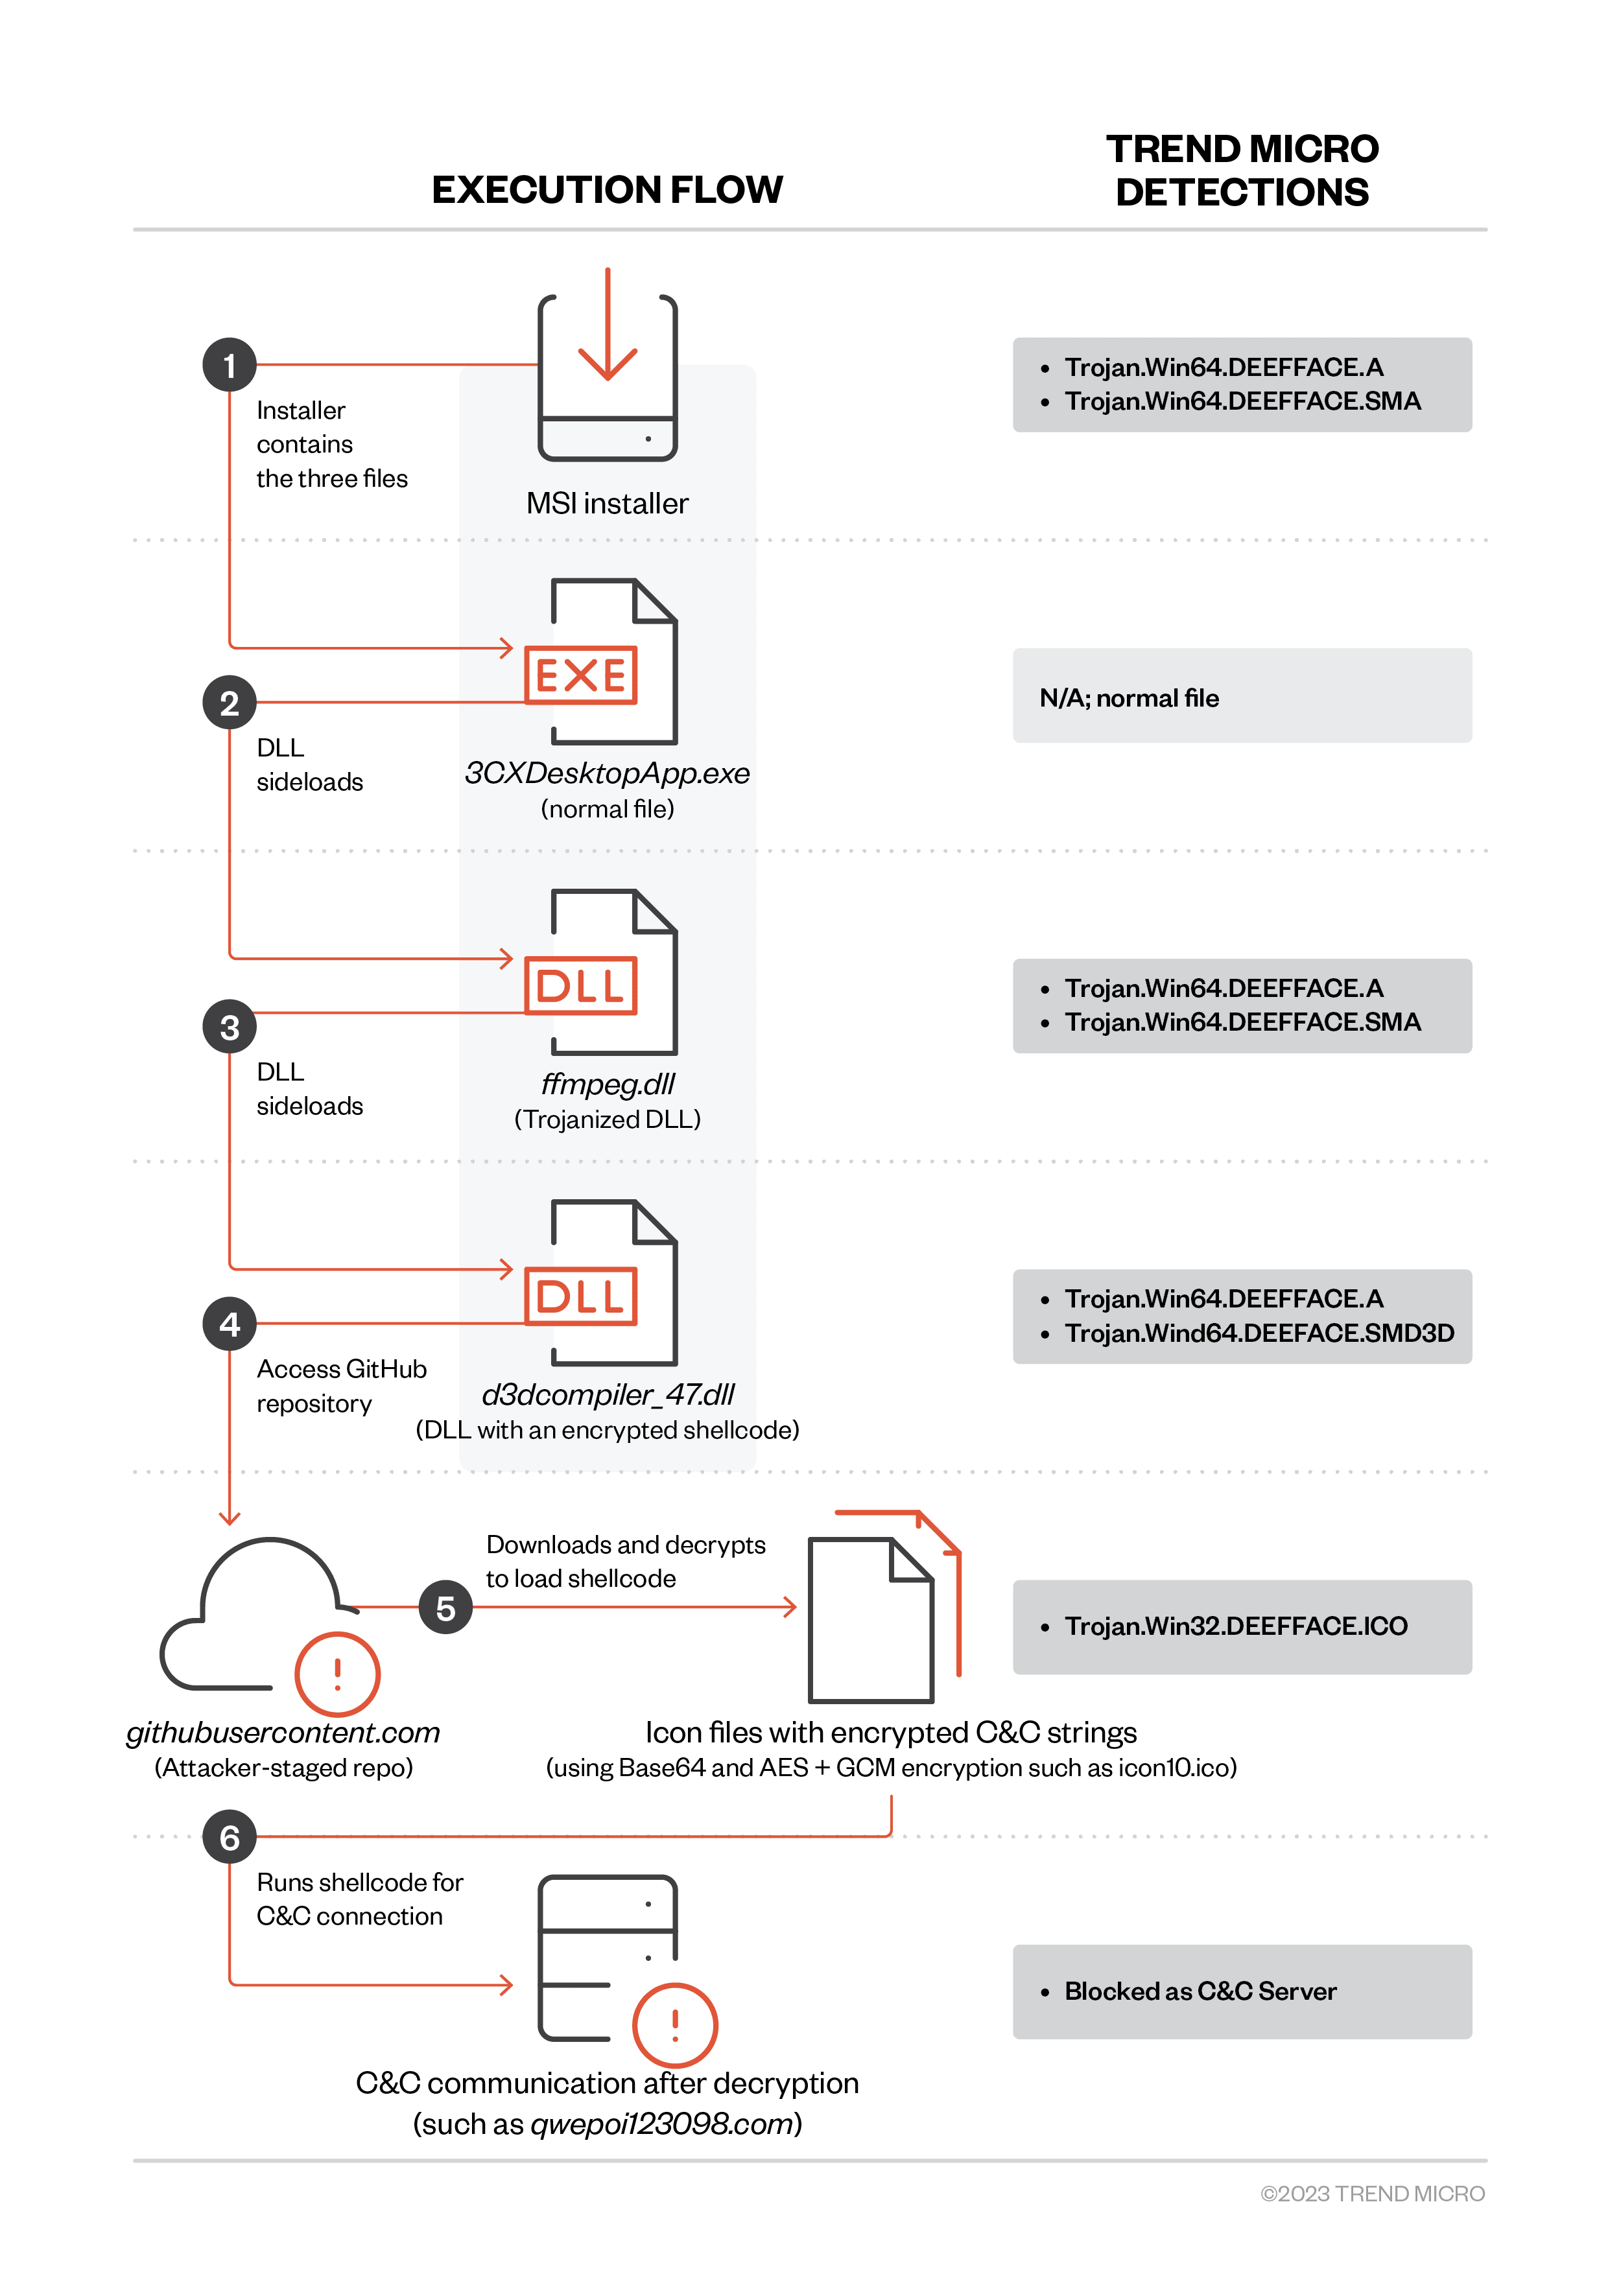 Figure 1. The detailed execution flow and Trend Micro detections of the malicious files. The MSI installer contains the .exe and two .dll files. The main source of the detection in the MSI installer is "ffmpeg.dll," which is the trojanized DLL.